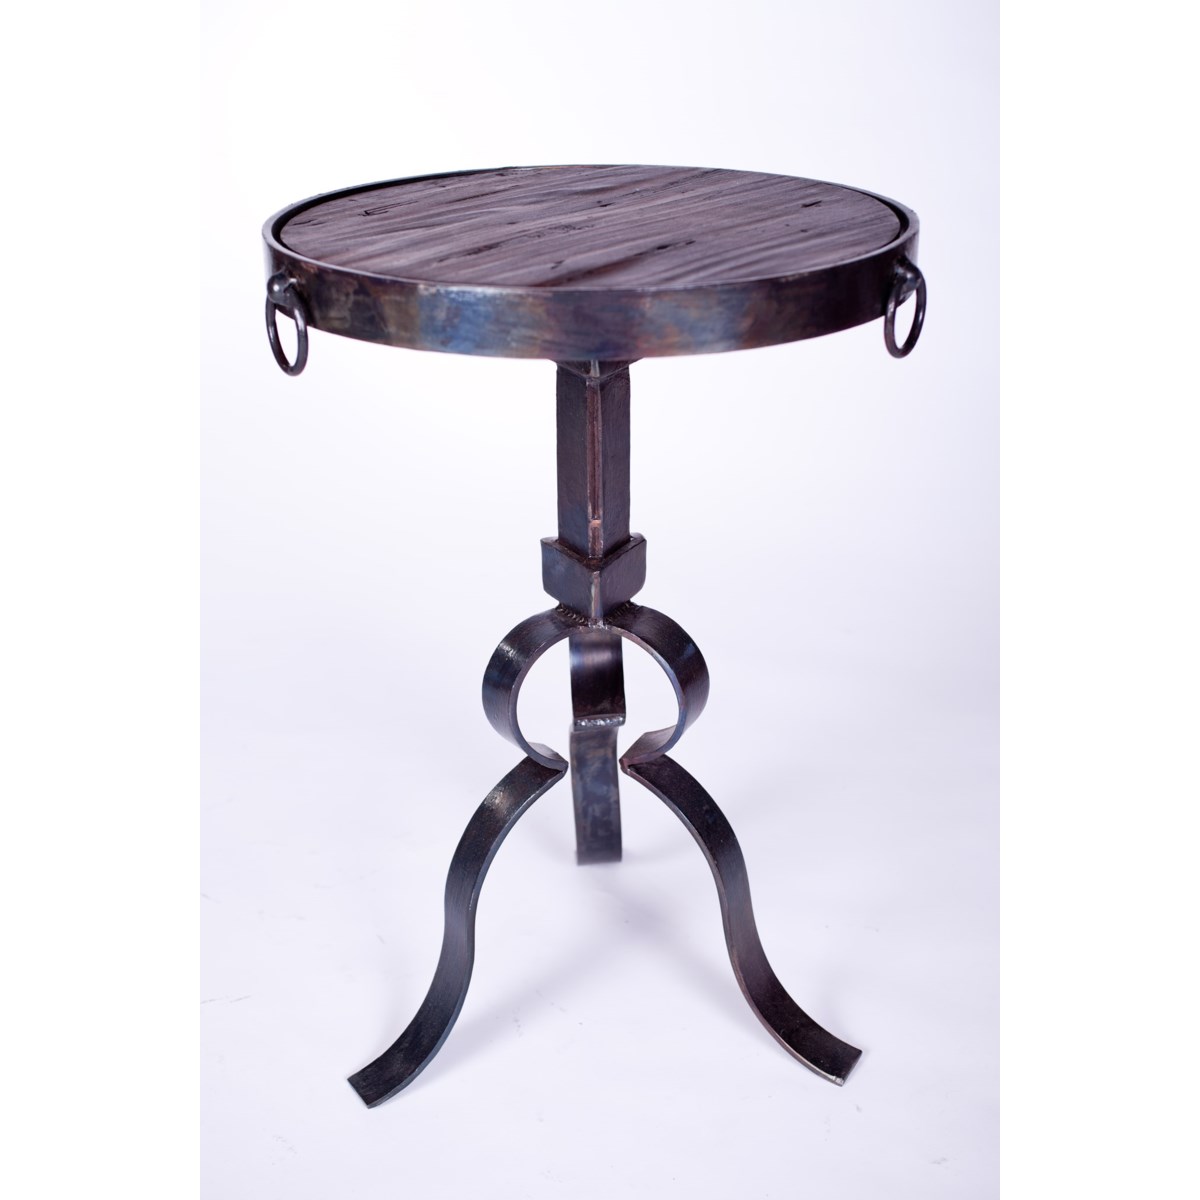 Round Iron Accent Table with Wood Top